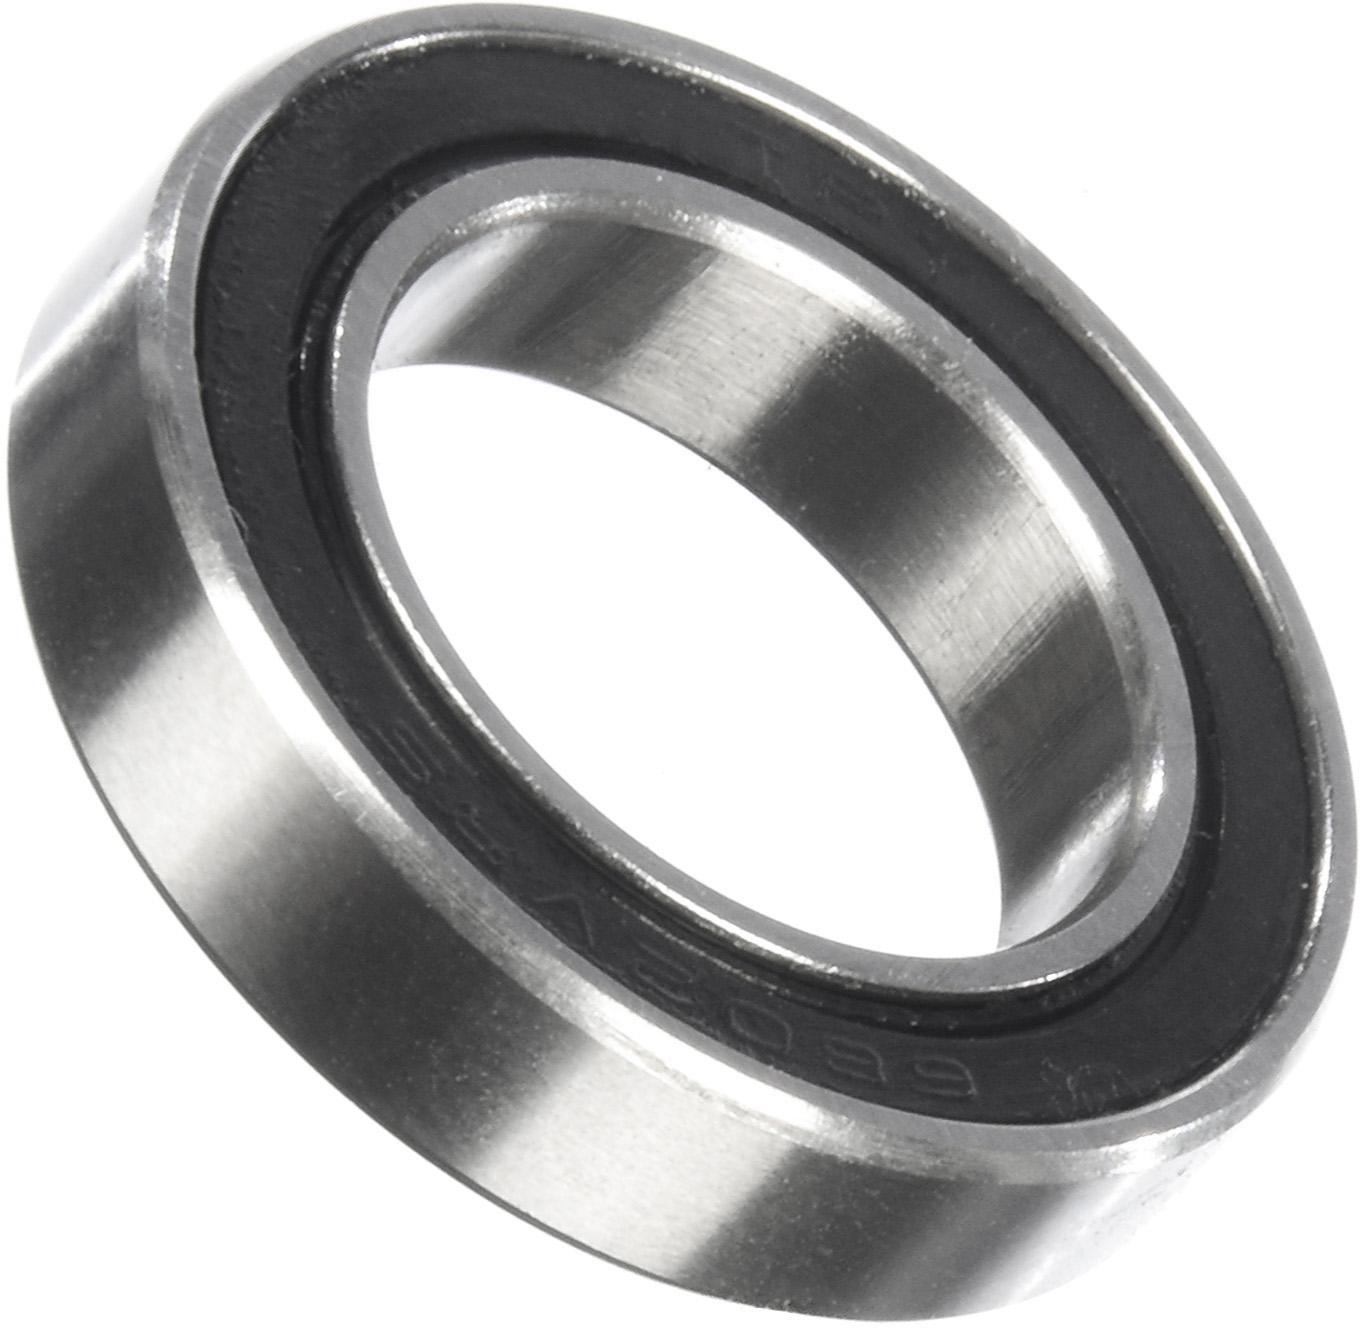 Brand-x Plus Sealed Bearing (6802-v2rs)  Silver